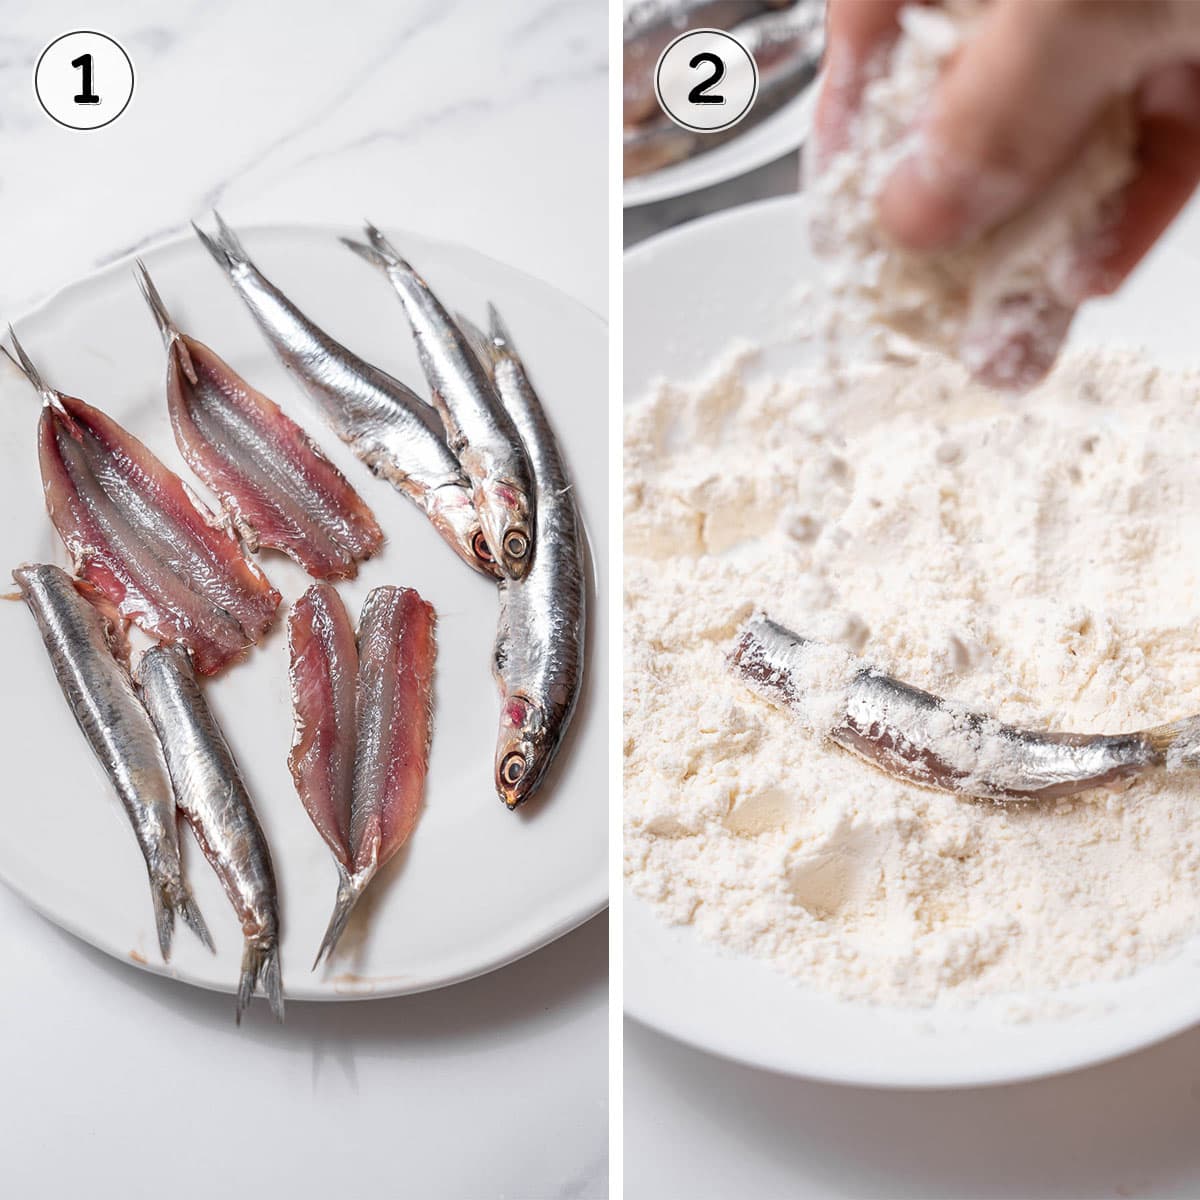 prepping and breading the anchovies.